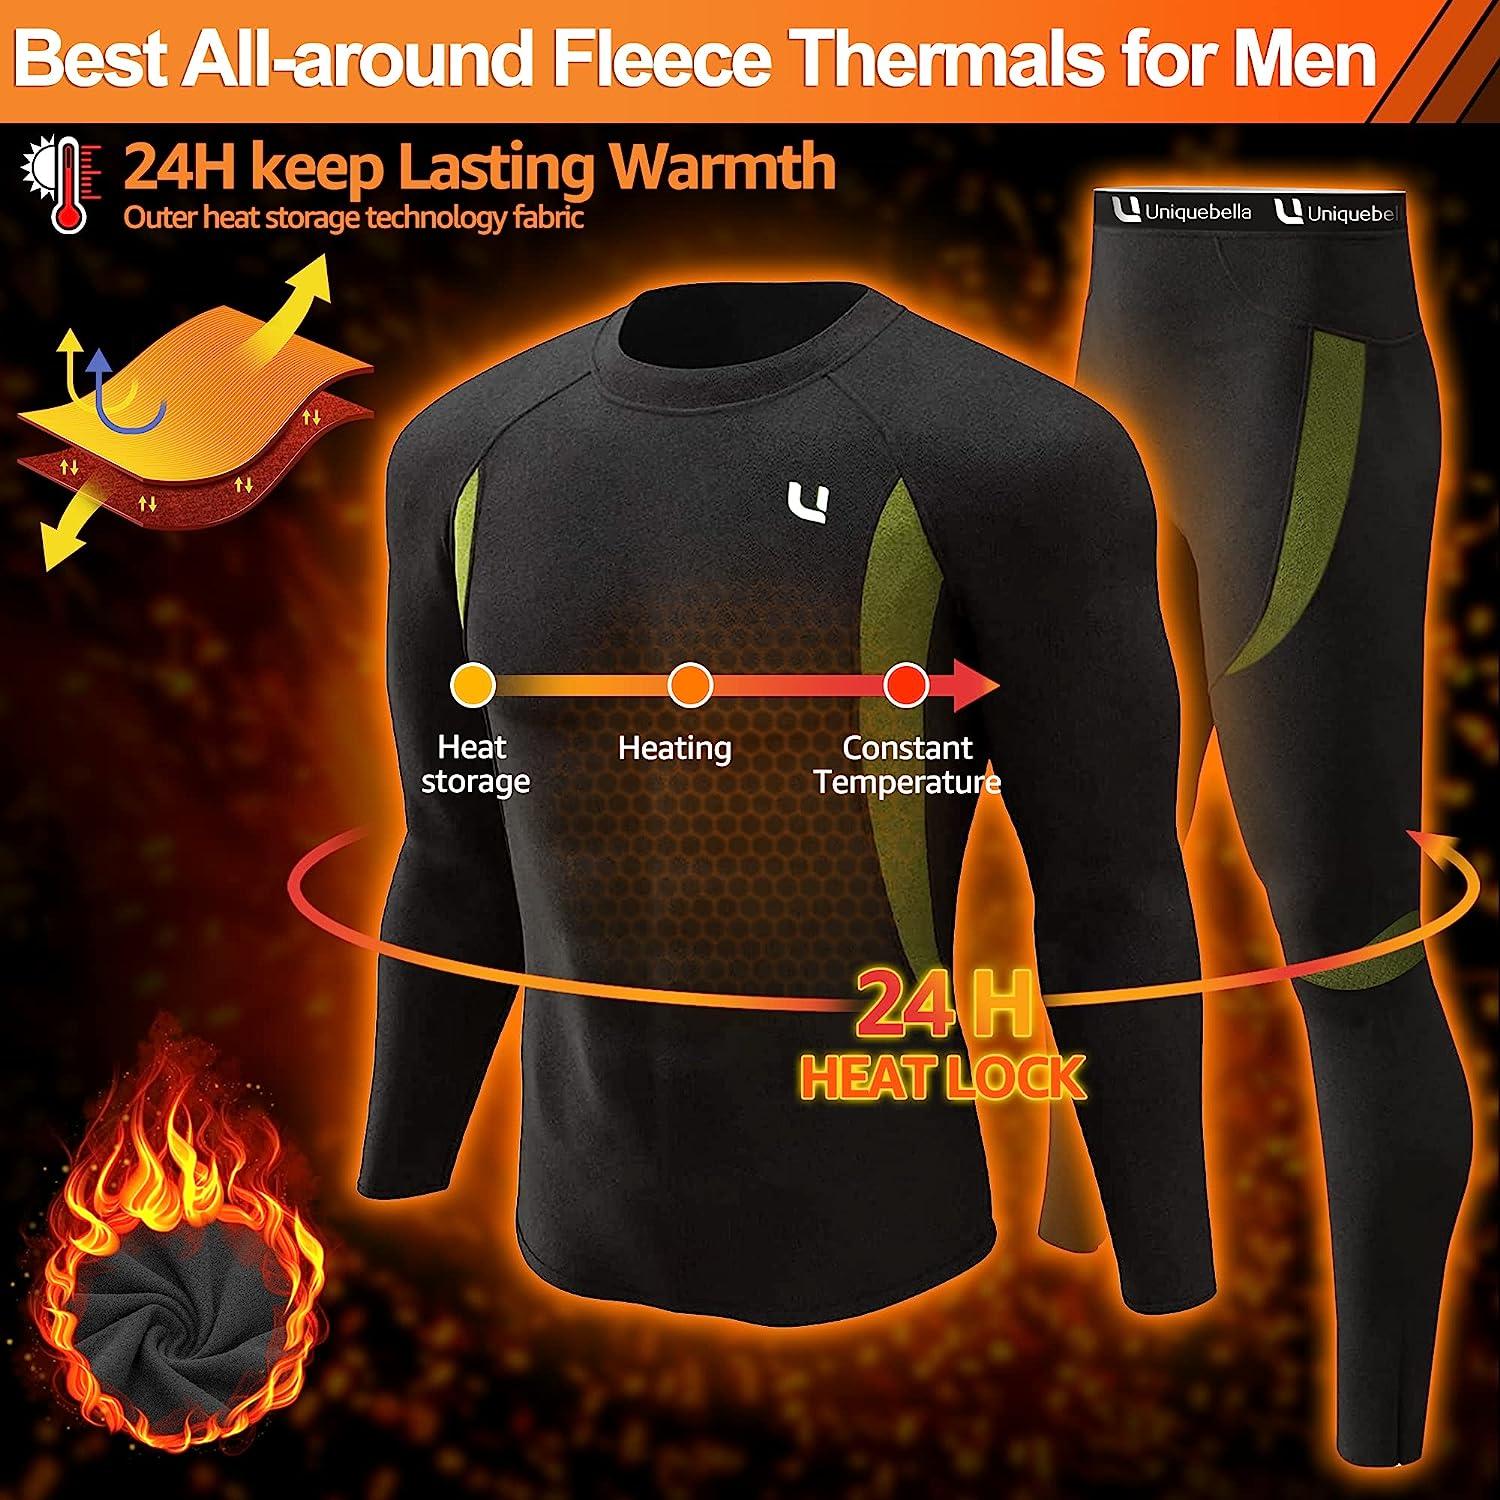 UNIQUEBELLA Men's Thermal Underwear Sets Top & Long Johns Fleece Sweat  Quick Drying Thermo Base Layer Aa-sets Black XX-Large